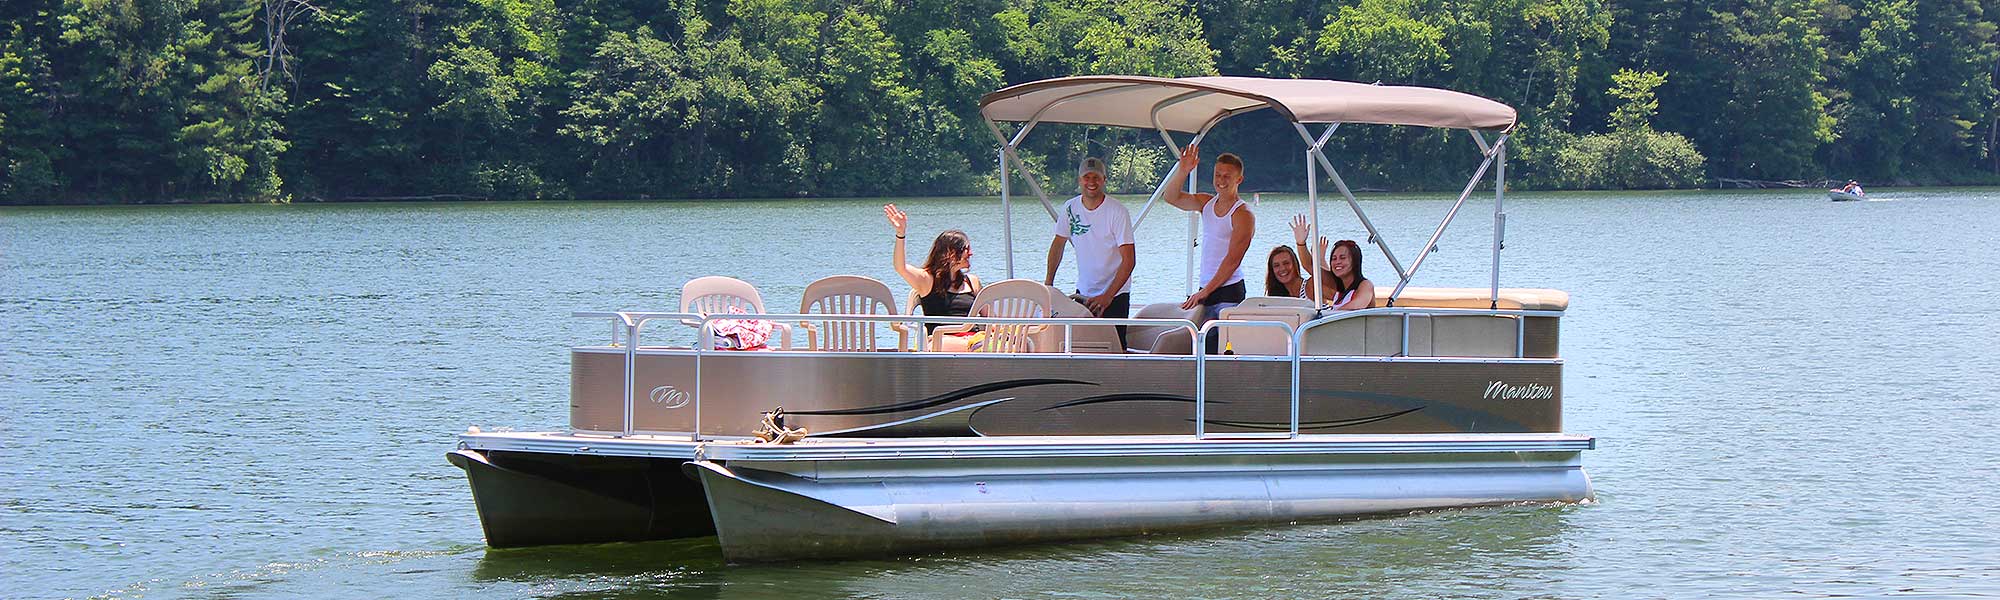 Ohio pontoon boat rental and fishing boat rental. Family fun, best day